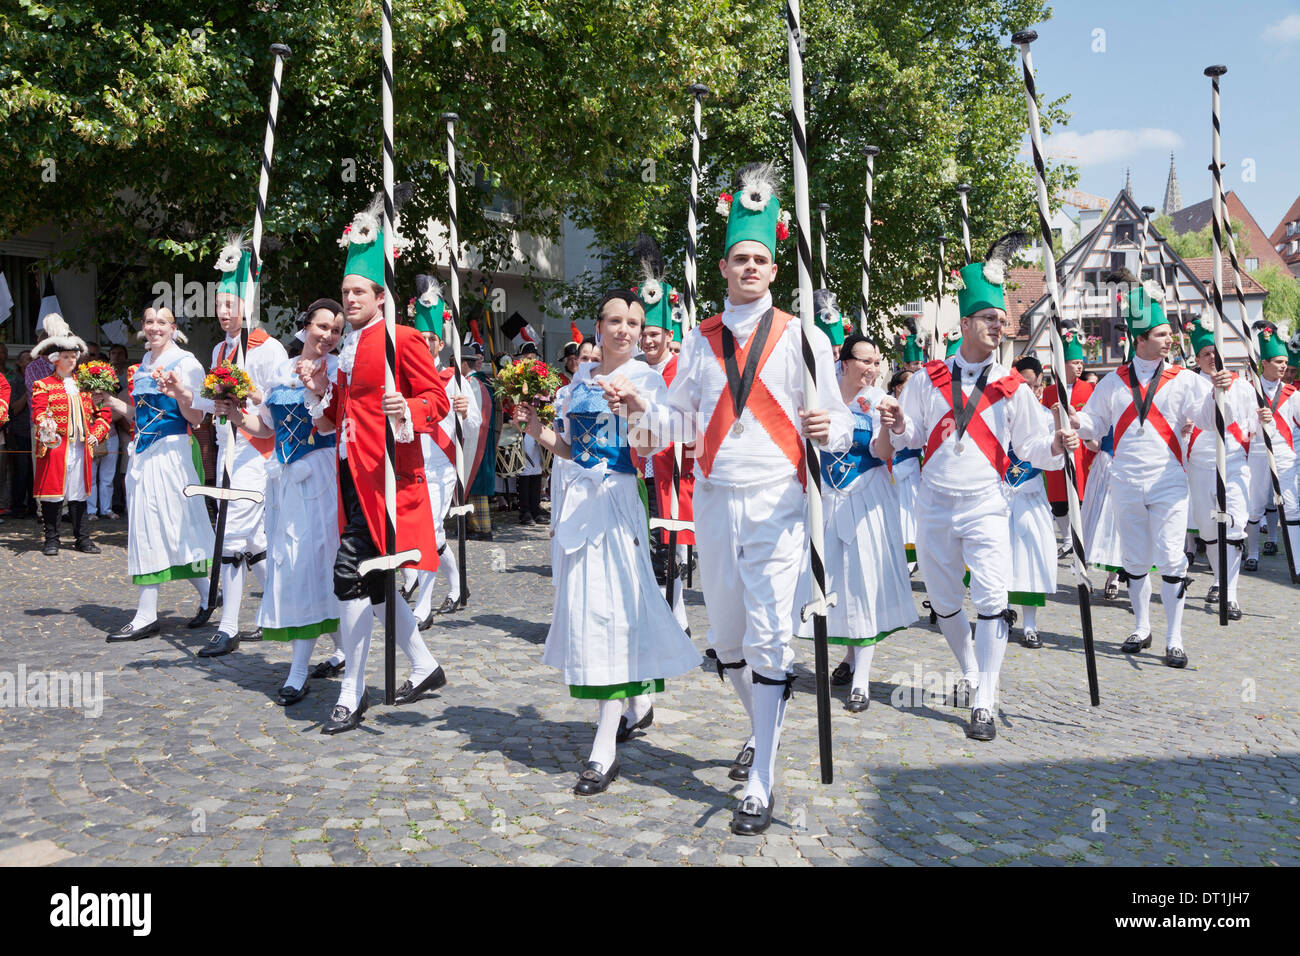 Traditional dance at a historical parade, Fischerstechen, Ulm, Baden Wurttemberg, Germany, Europe Stock Photo